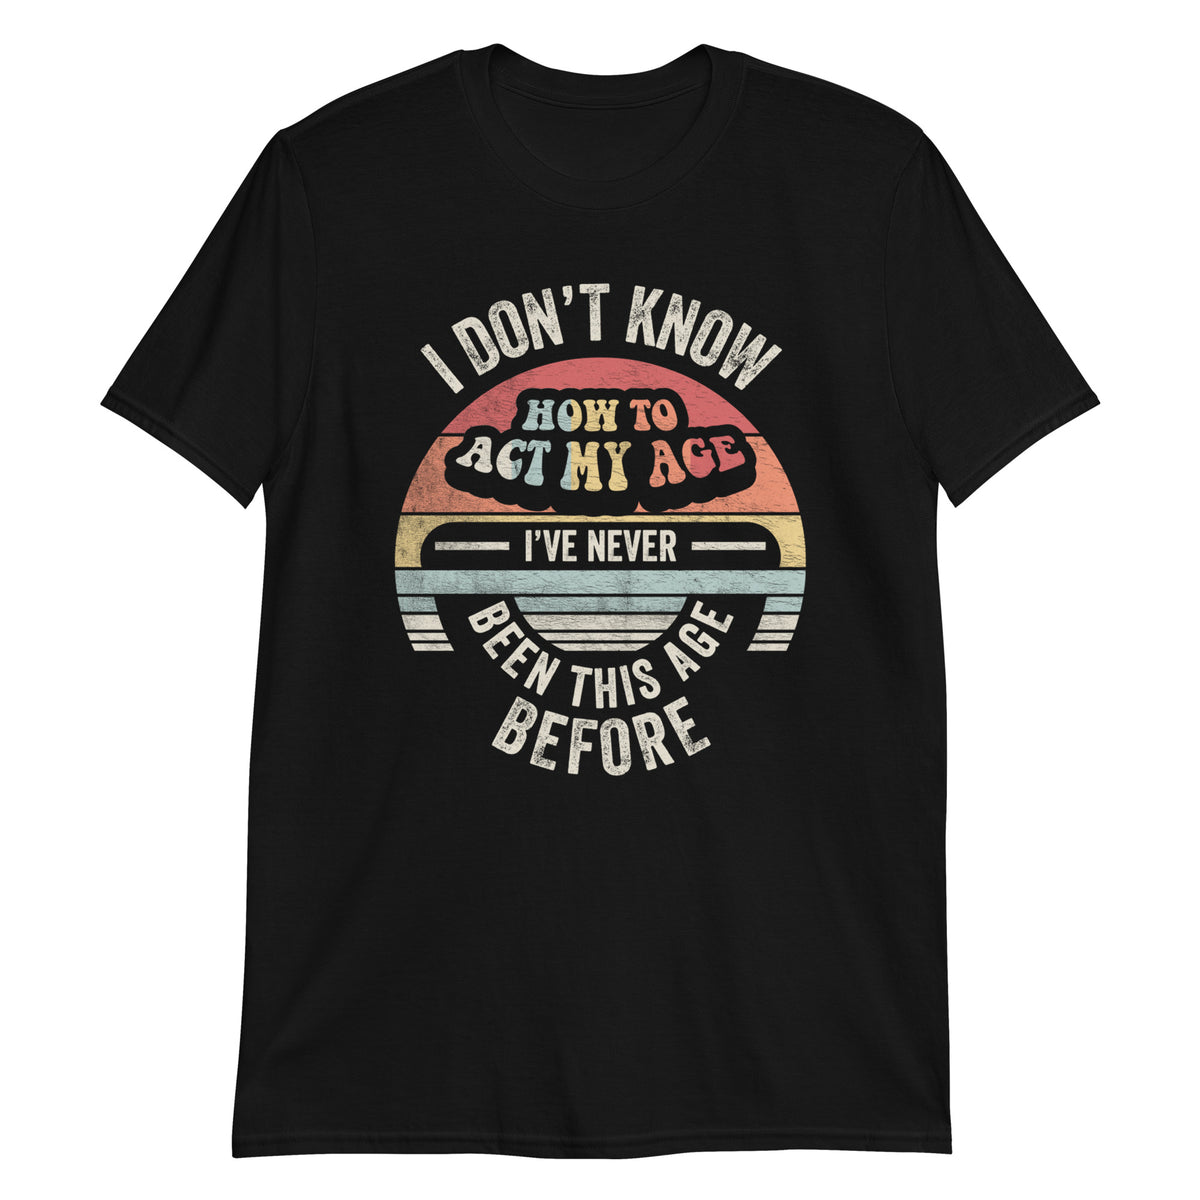 I Don't Konw How to Act My Age T-Shirt